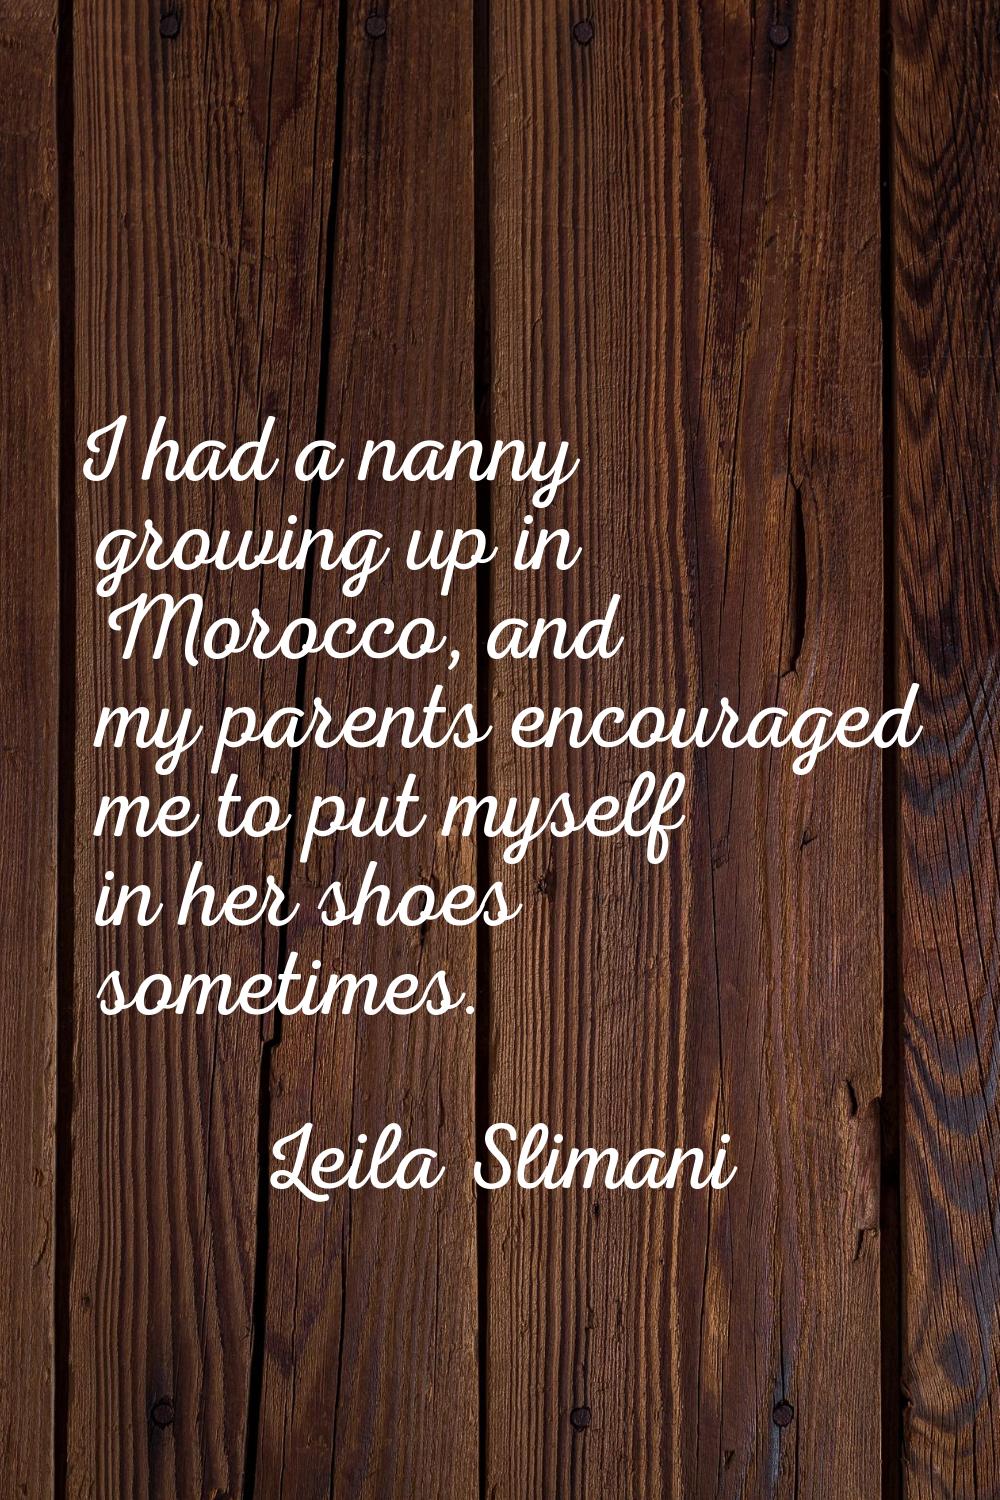 I had a nanny growing up in Morocco, and my parents encouraged me to put myself in her shoes someti